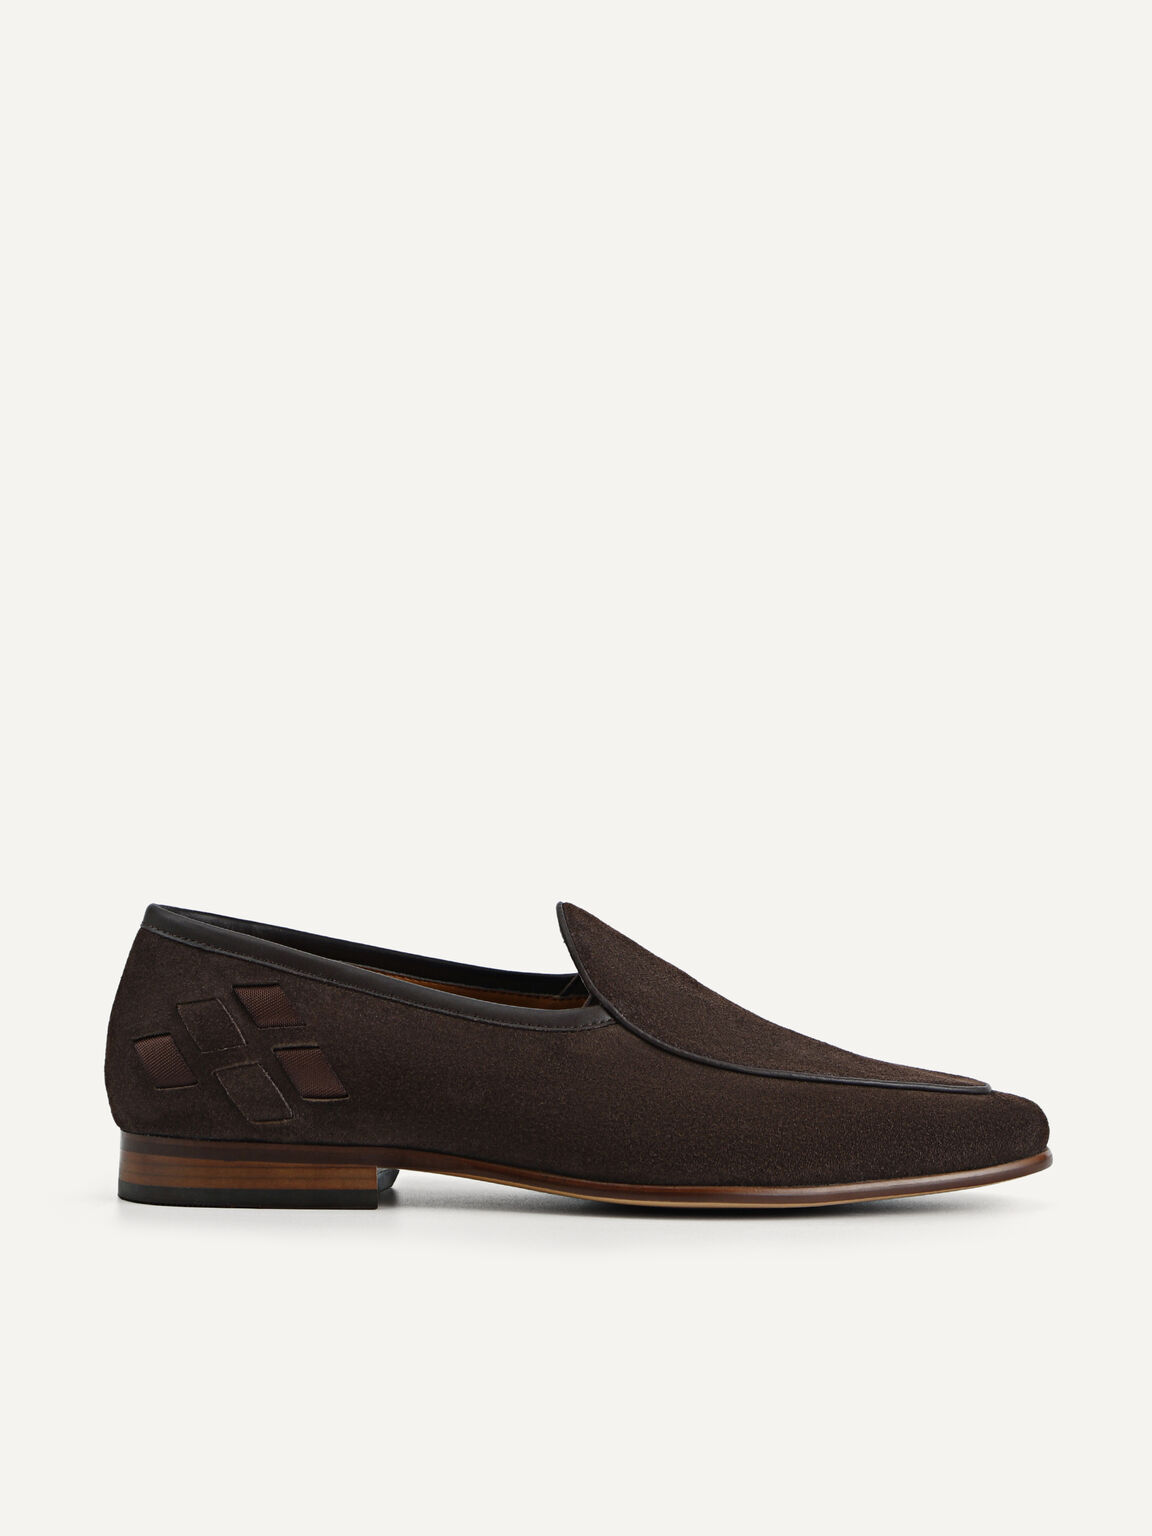 Suede Leather Loafers, Dark Brown